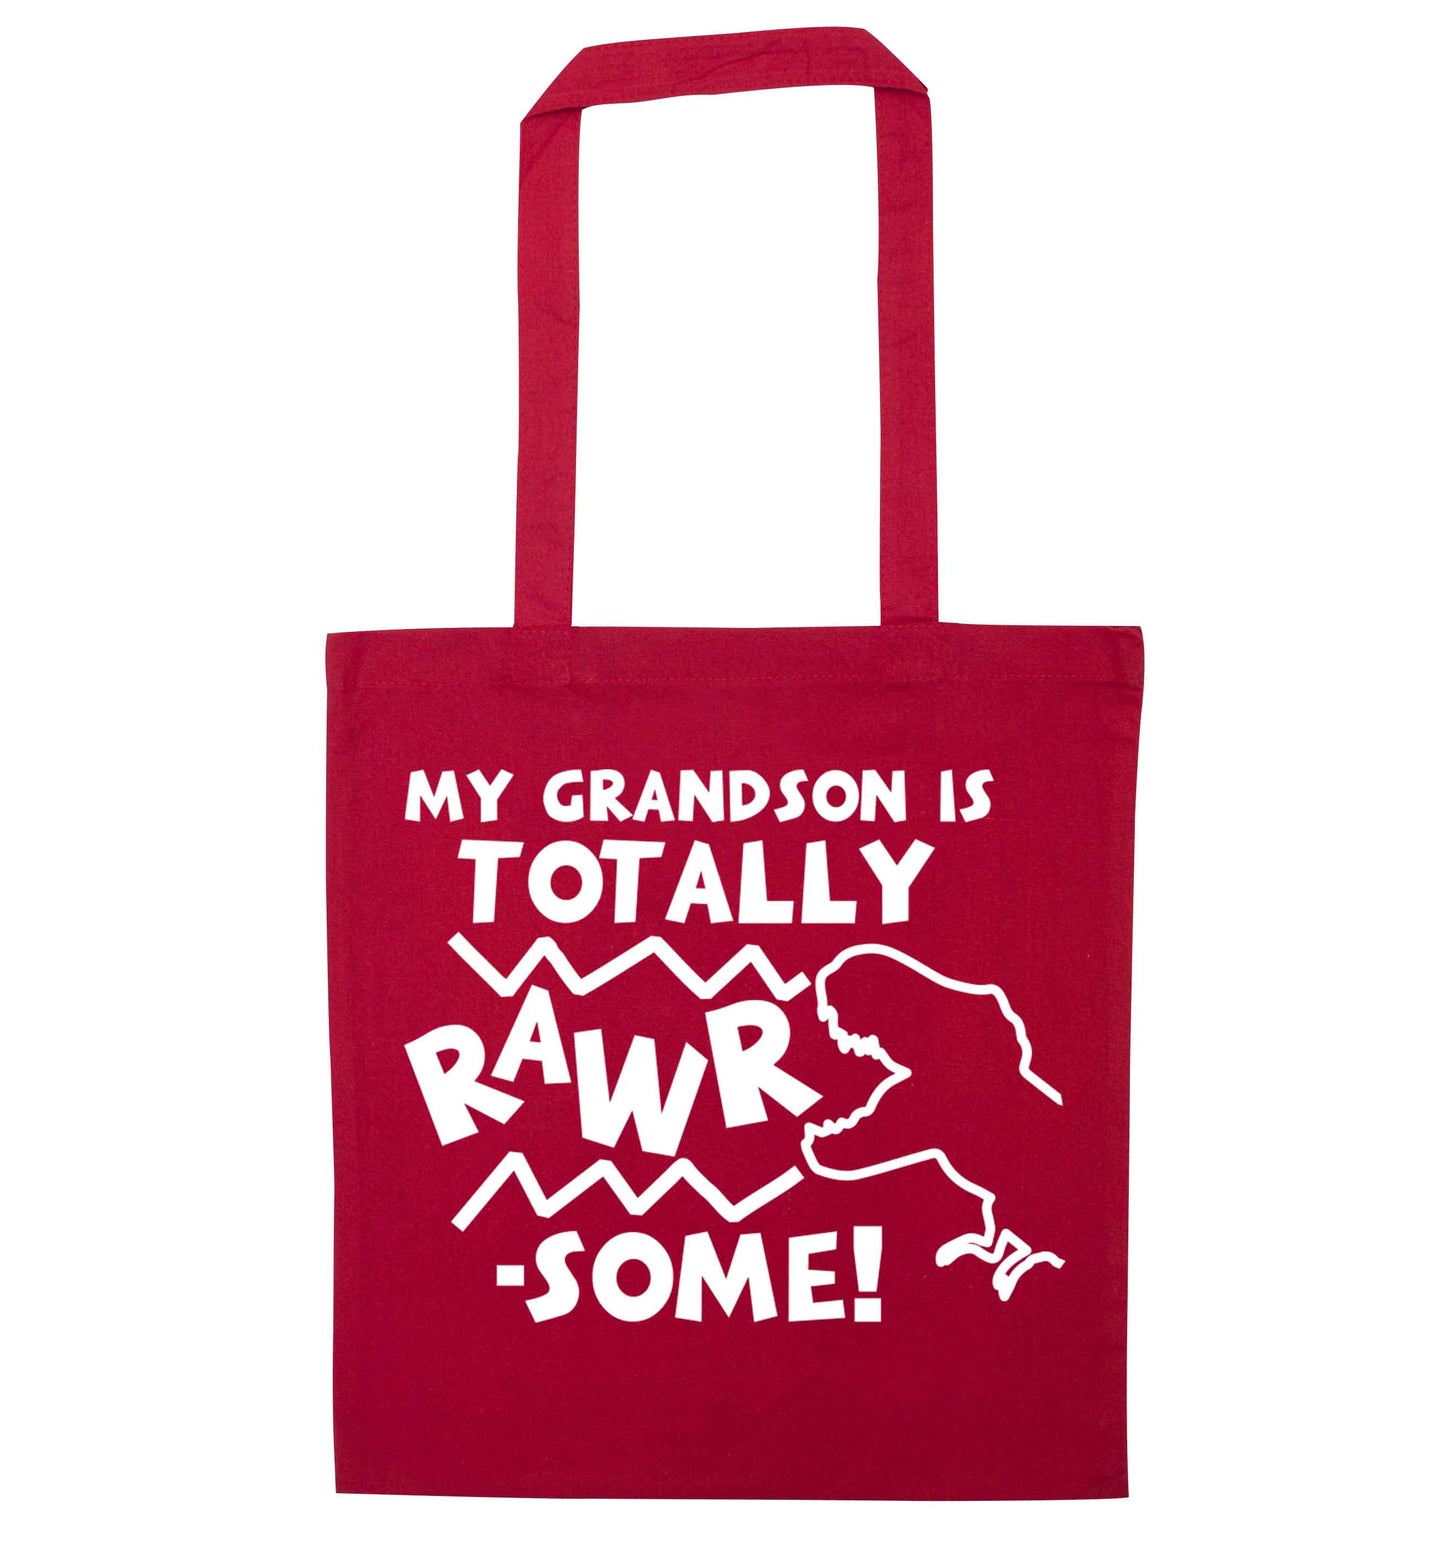 My grandson is totally rawrsome red tote bag